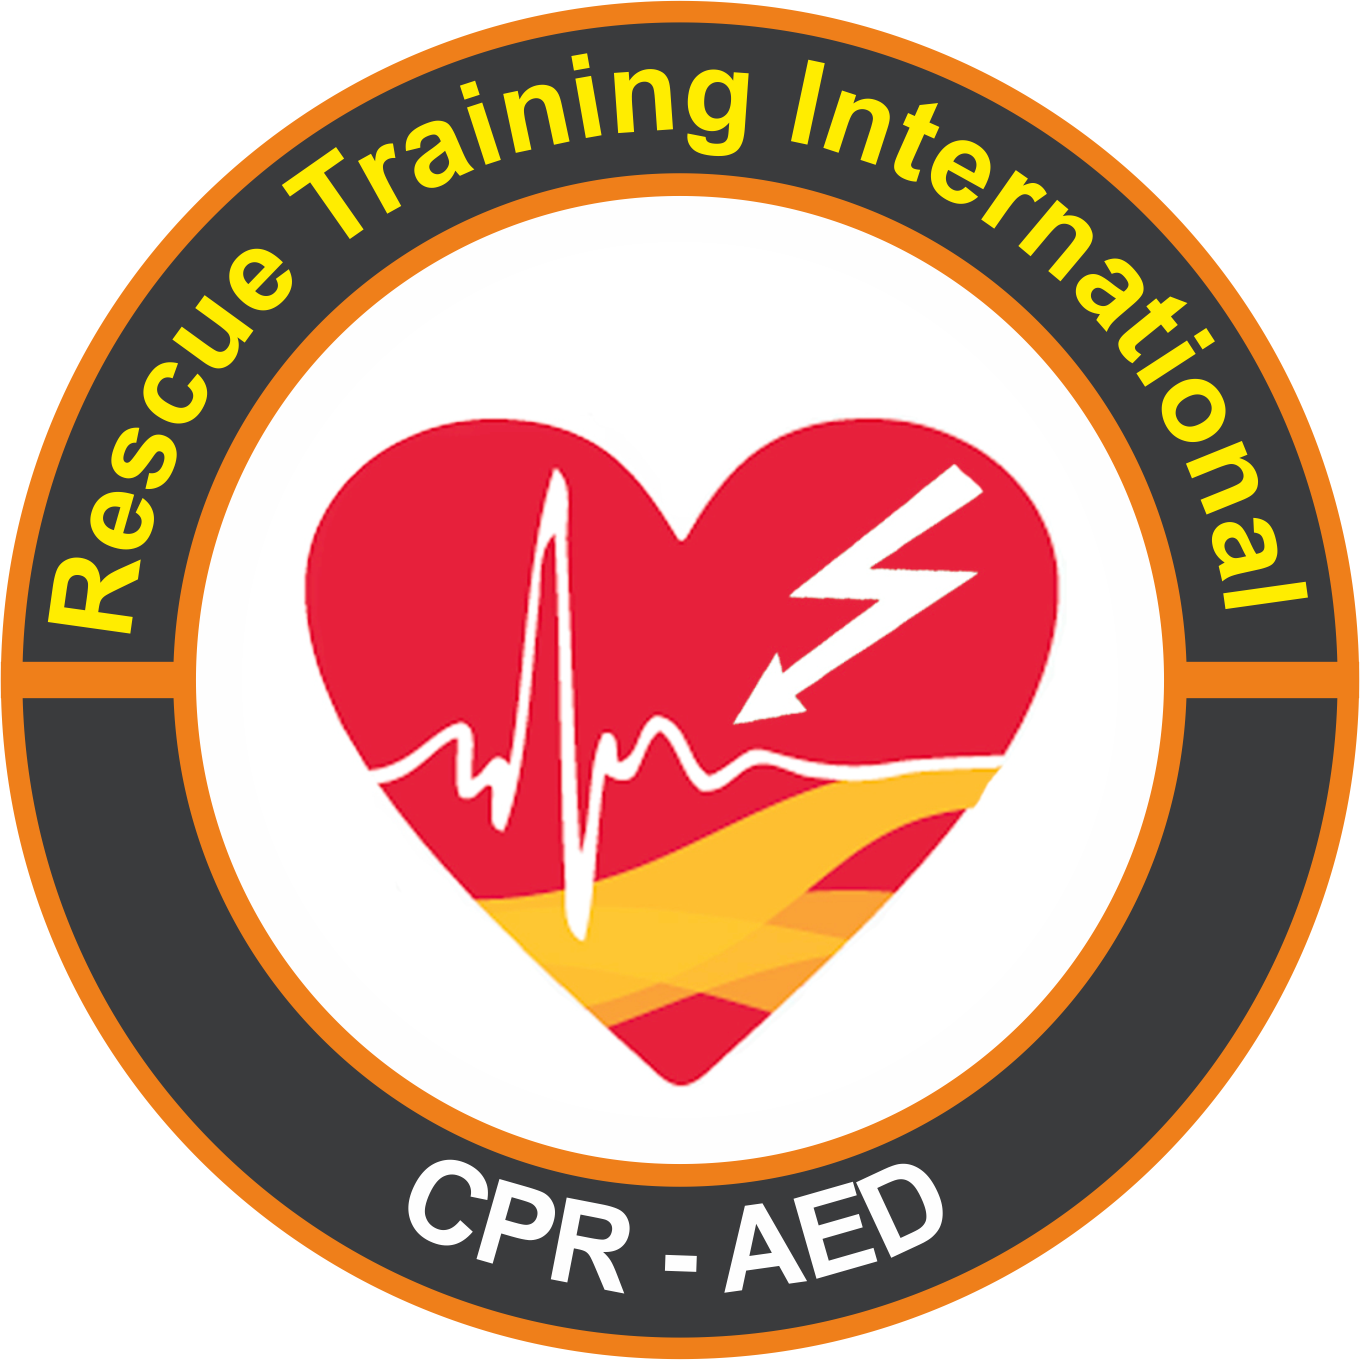 CPR -AED